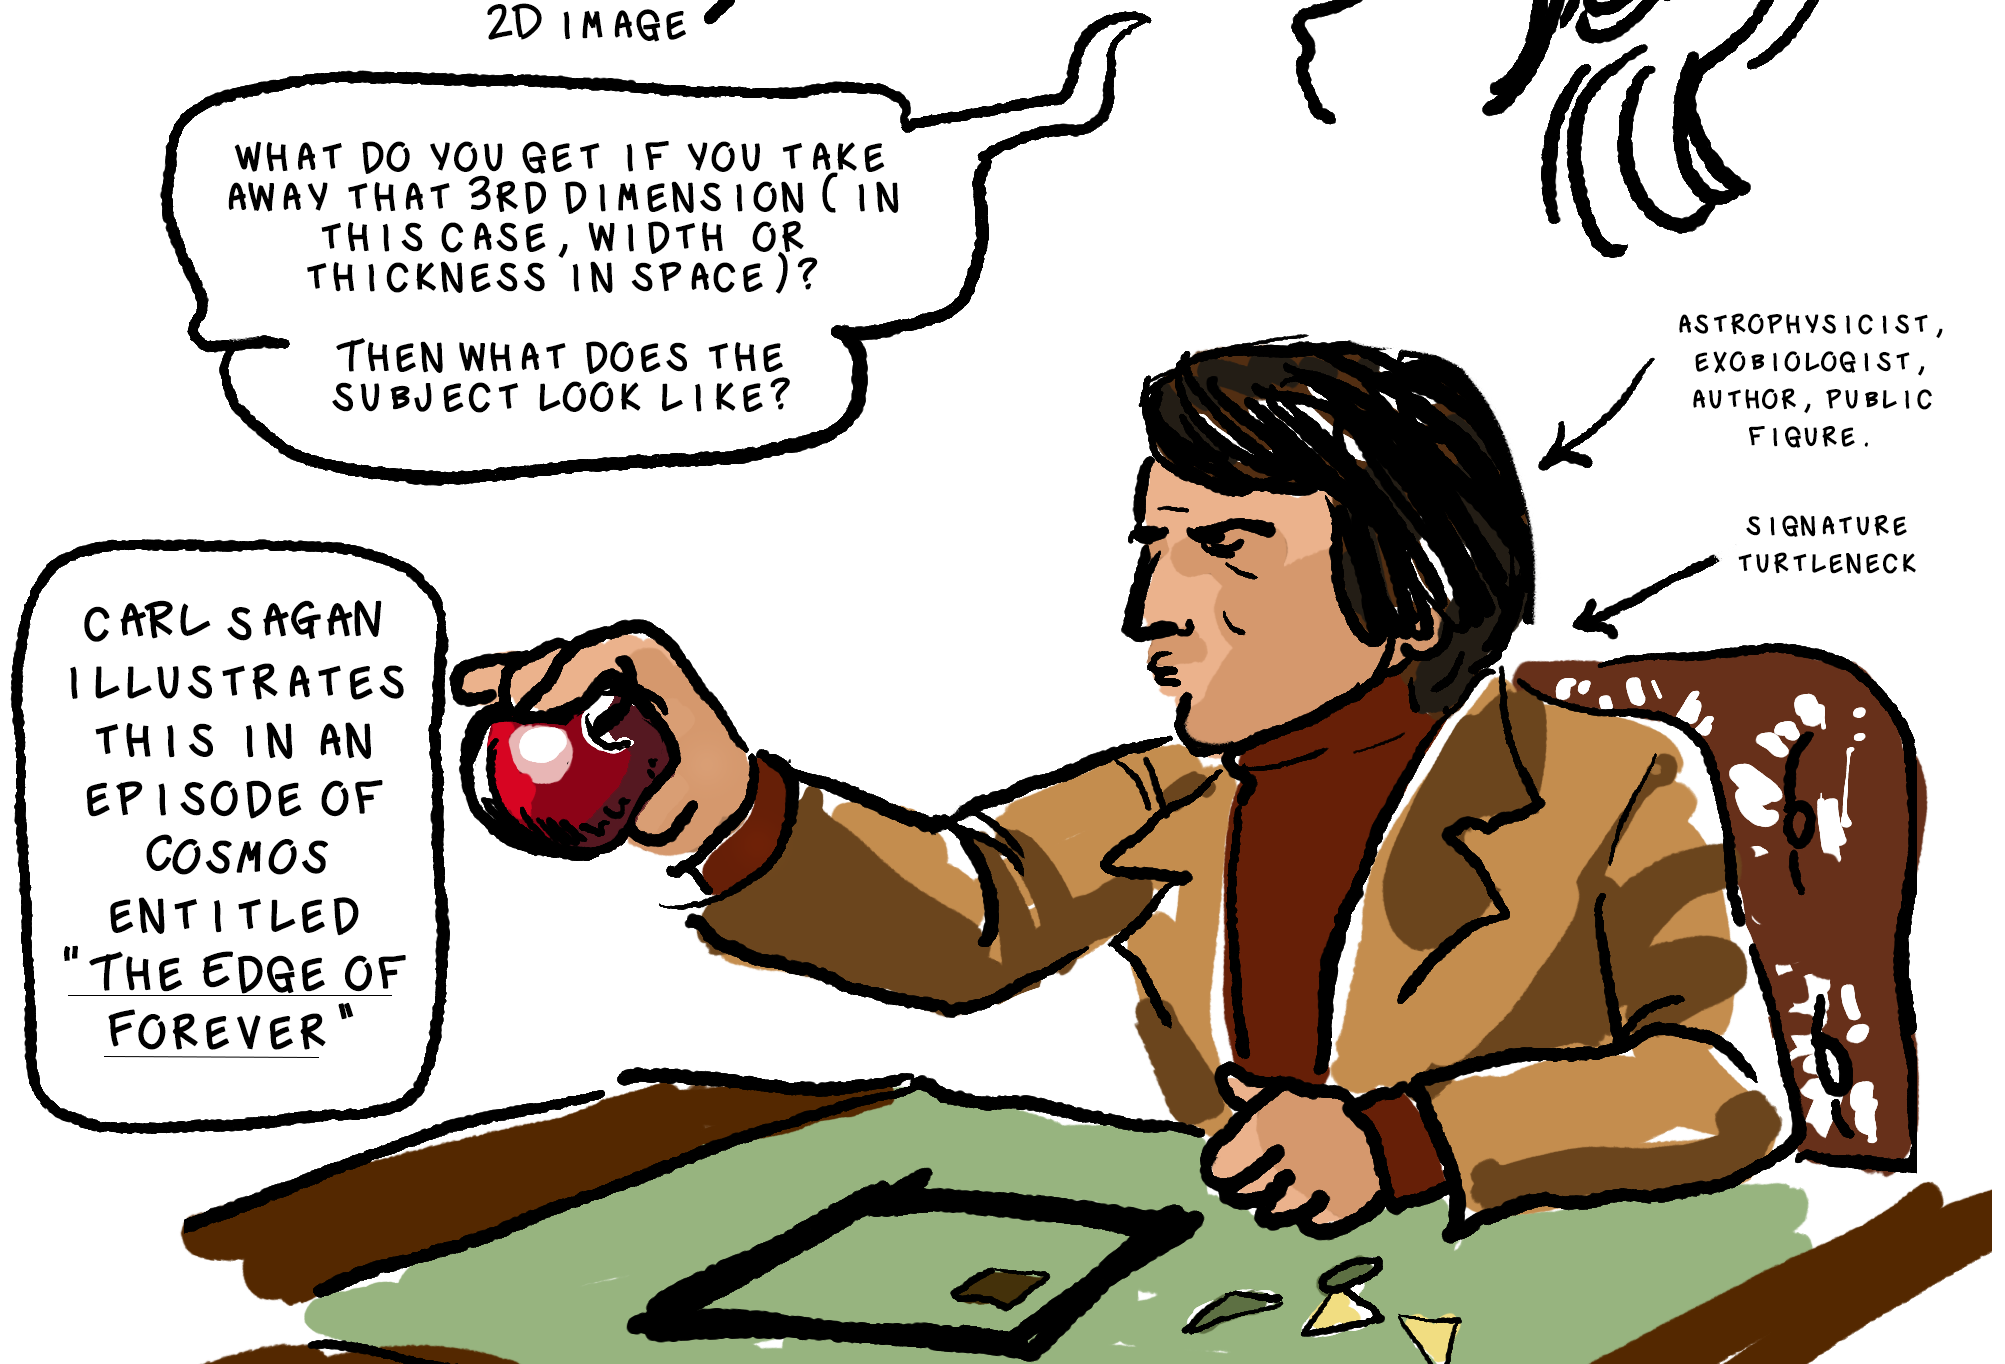 A narration bubble reads, Carl Sagan illustrates this in an episode of Cosmos entitled the Edge of Forever, which is hyperlinked to the episode on YouTube. To the right of this bubble we see Carl Sagan (astrophysicist, exobiologist, author, and public figure) wearing his signature maroon turtleneck. He is seated at a drafting table holding an apple above it. On the drafting table are little cutouts of shapes, like triangles and squares, of different colors.